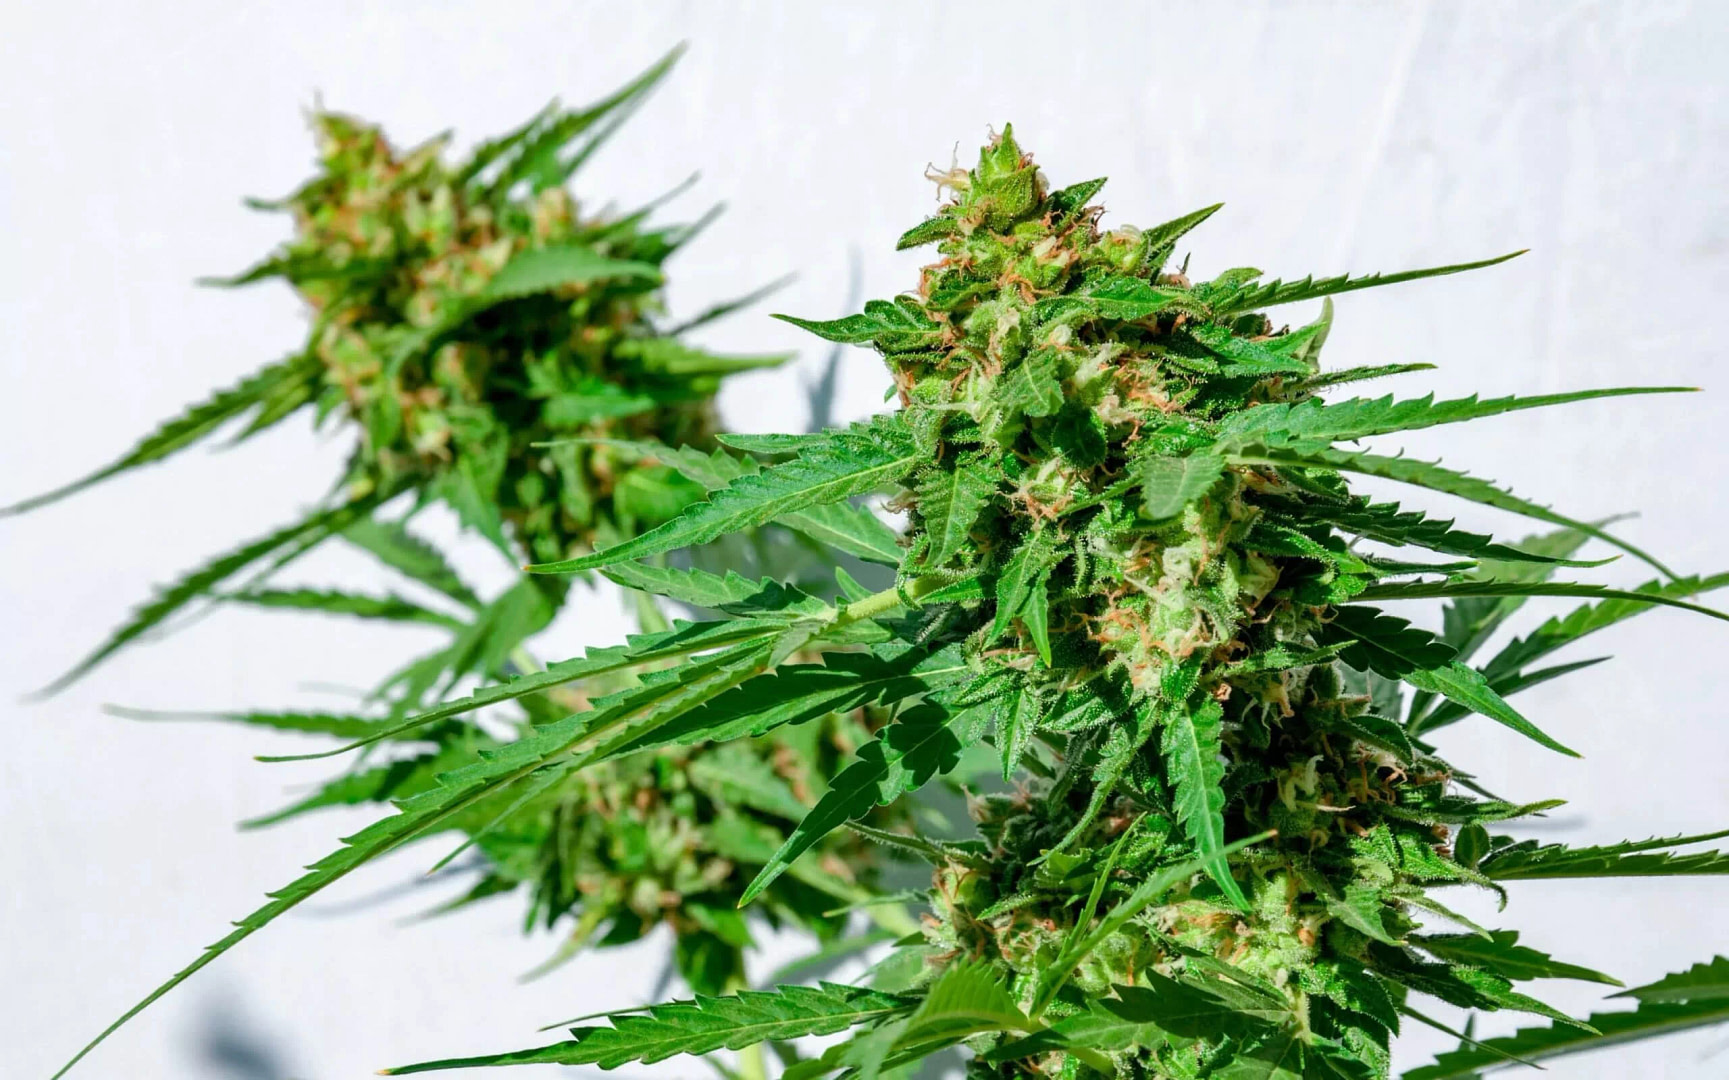 How to Avoid Over and Under Ripe Buds